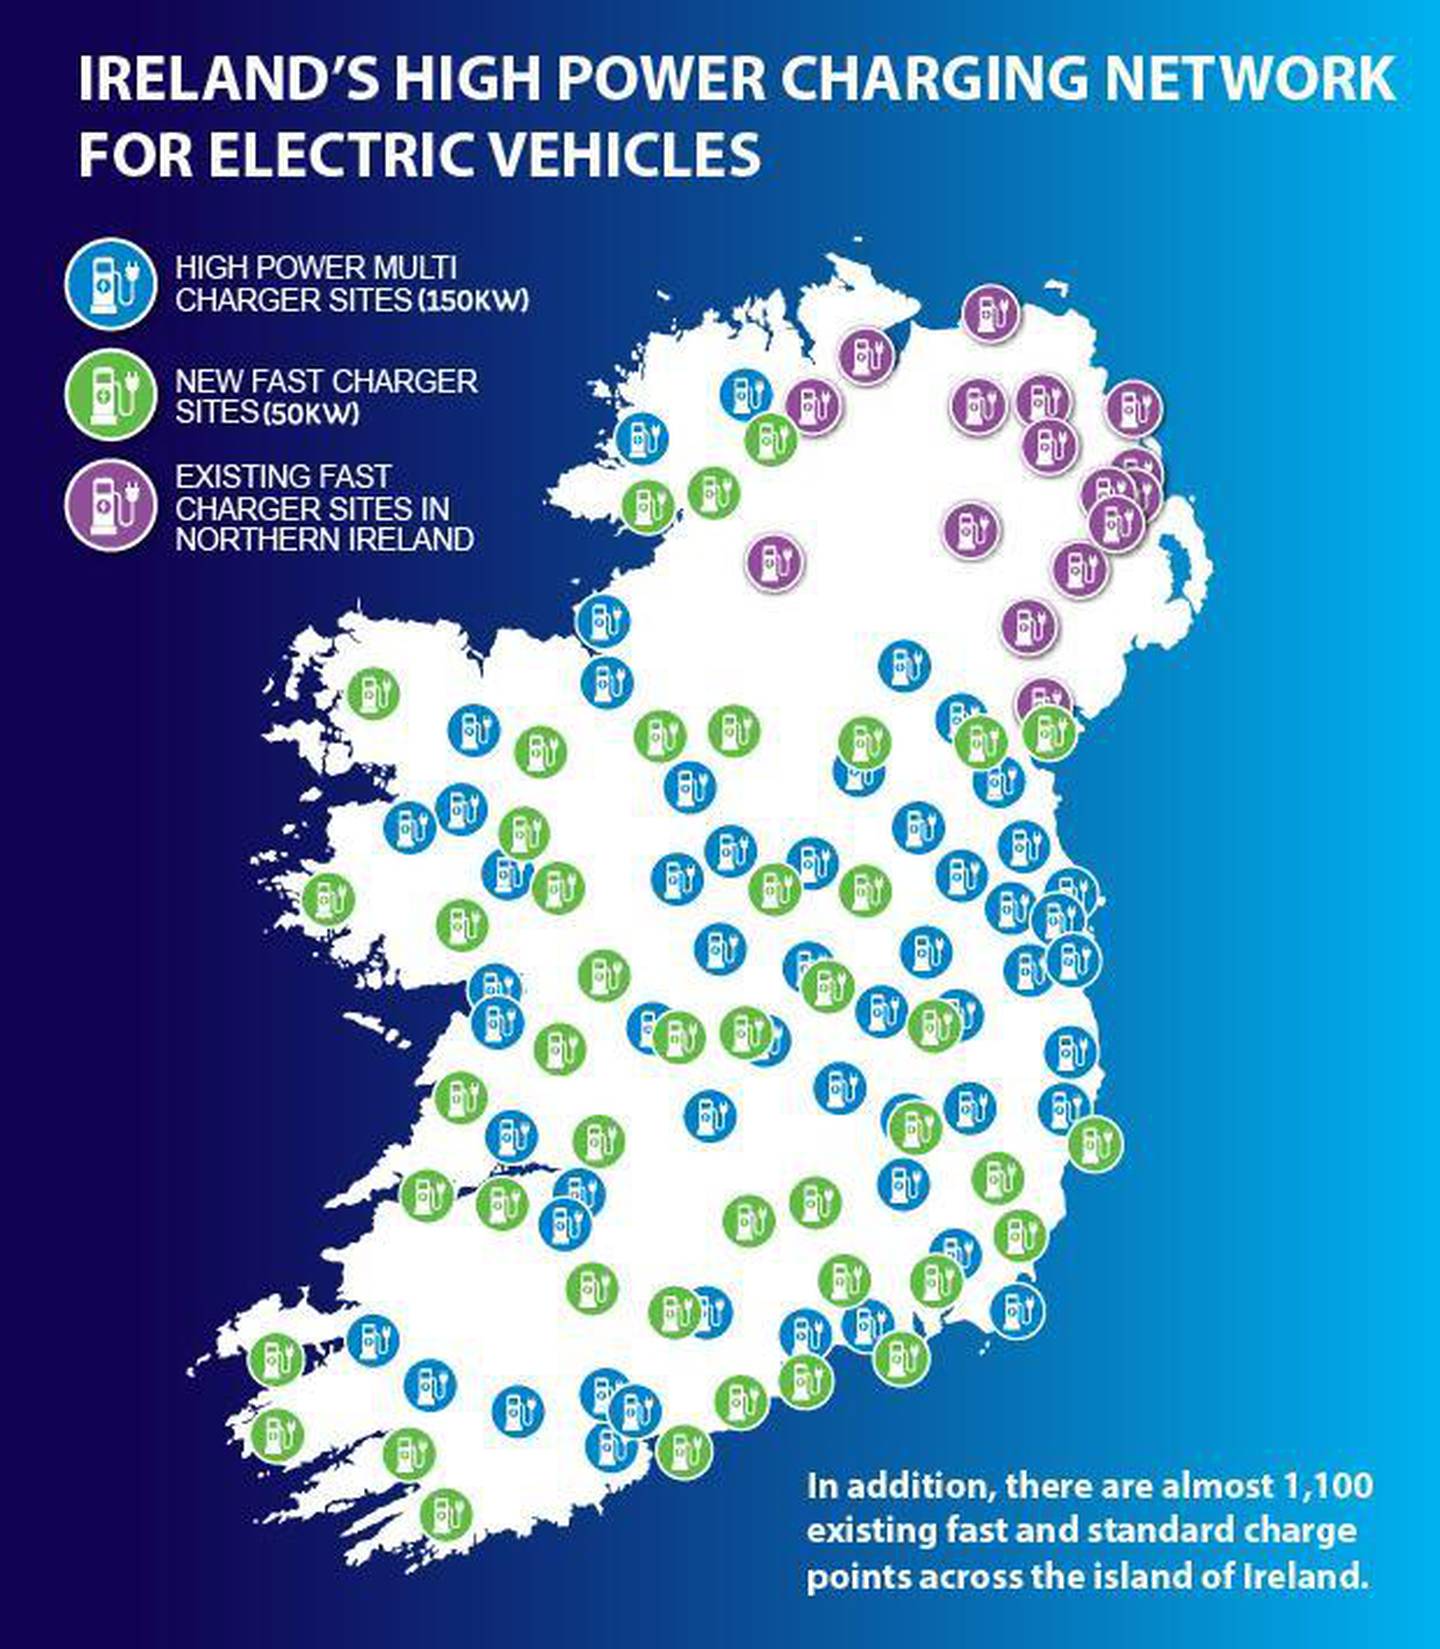 Government to invest €20m in electric vehicle charging points The